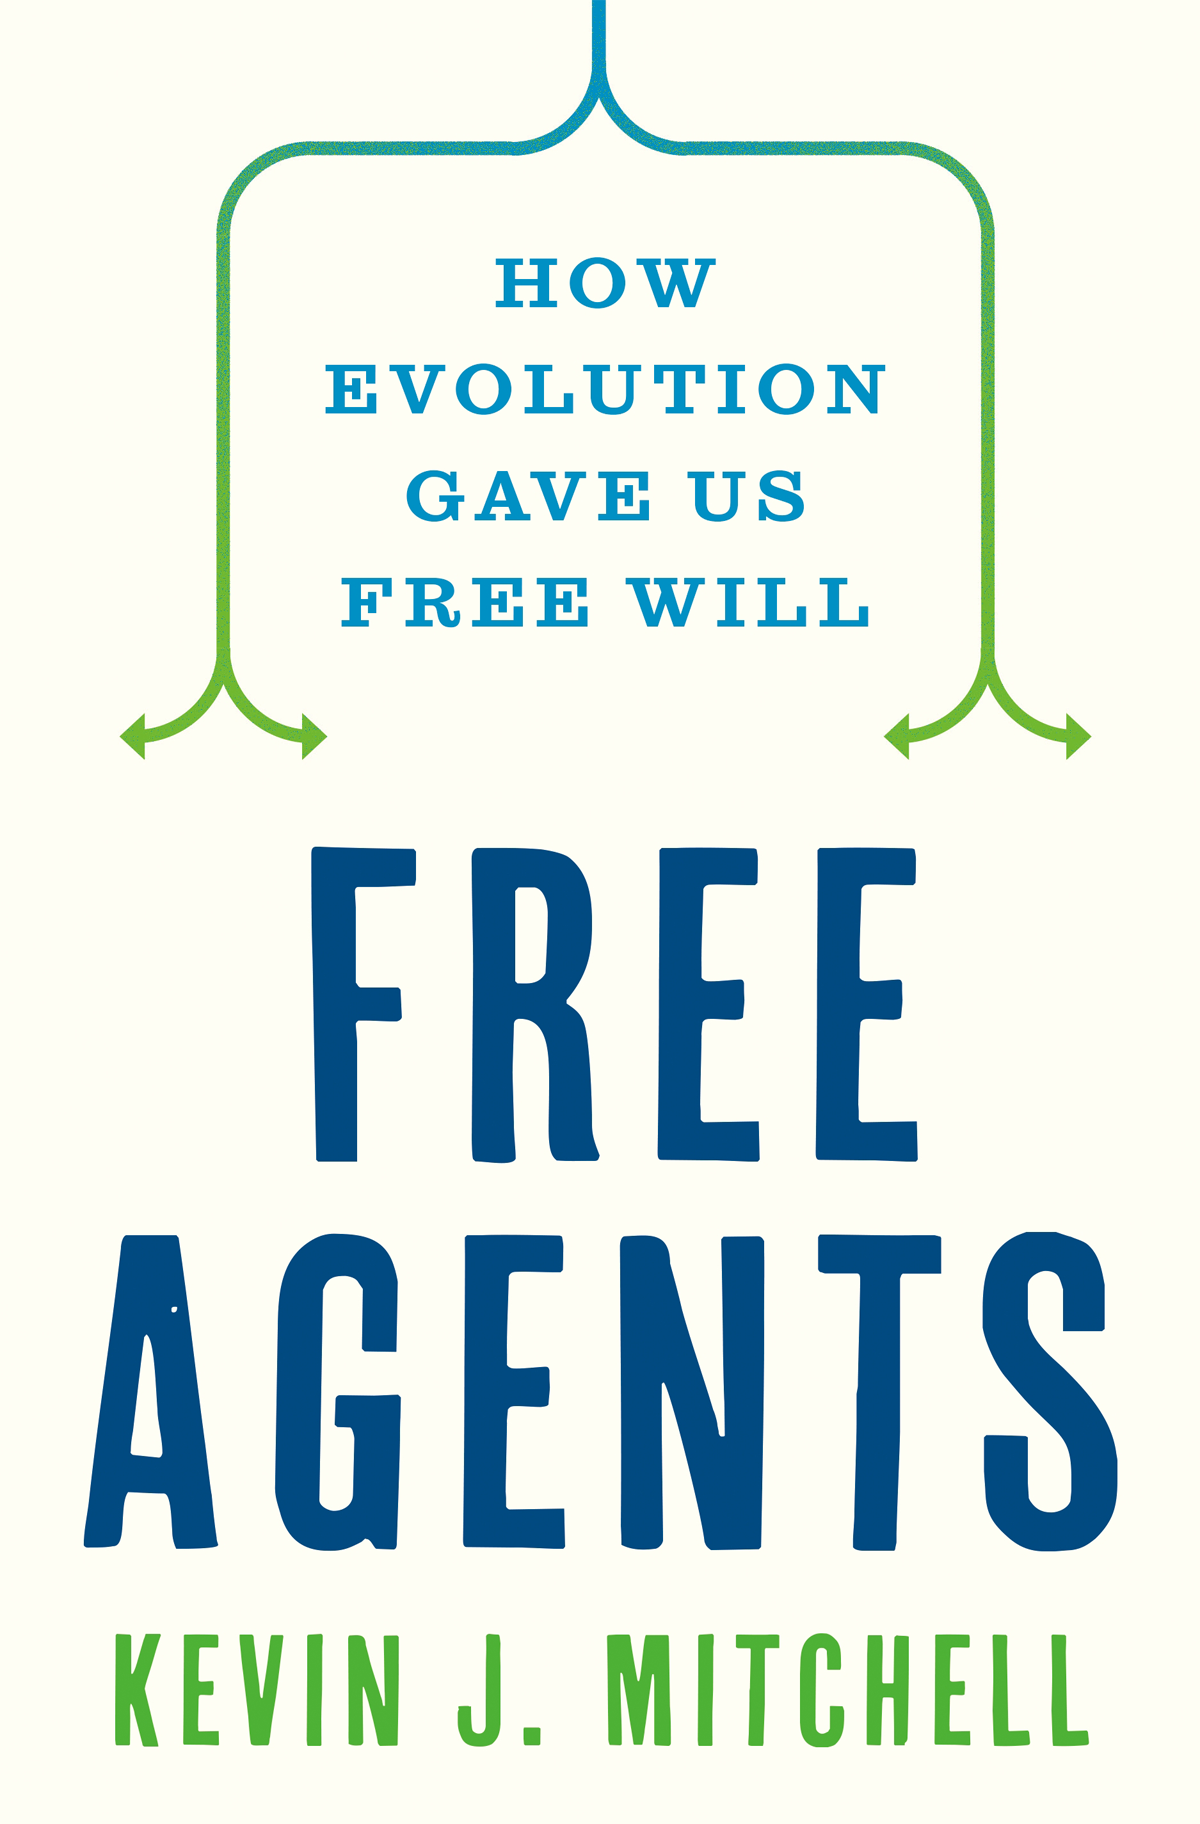 Book cover of Free Agents by Kevin Mitchell.